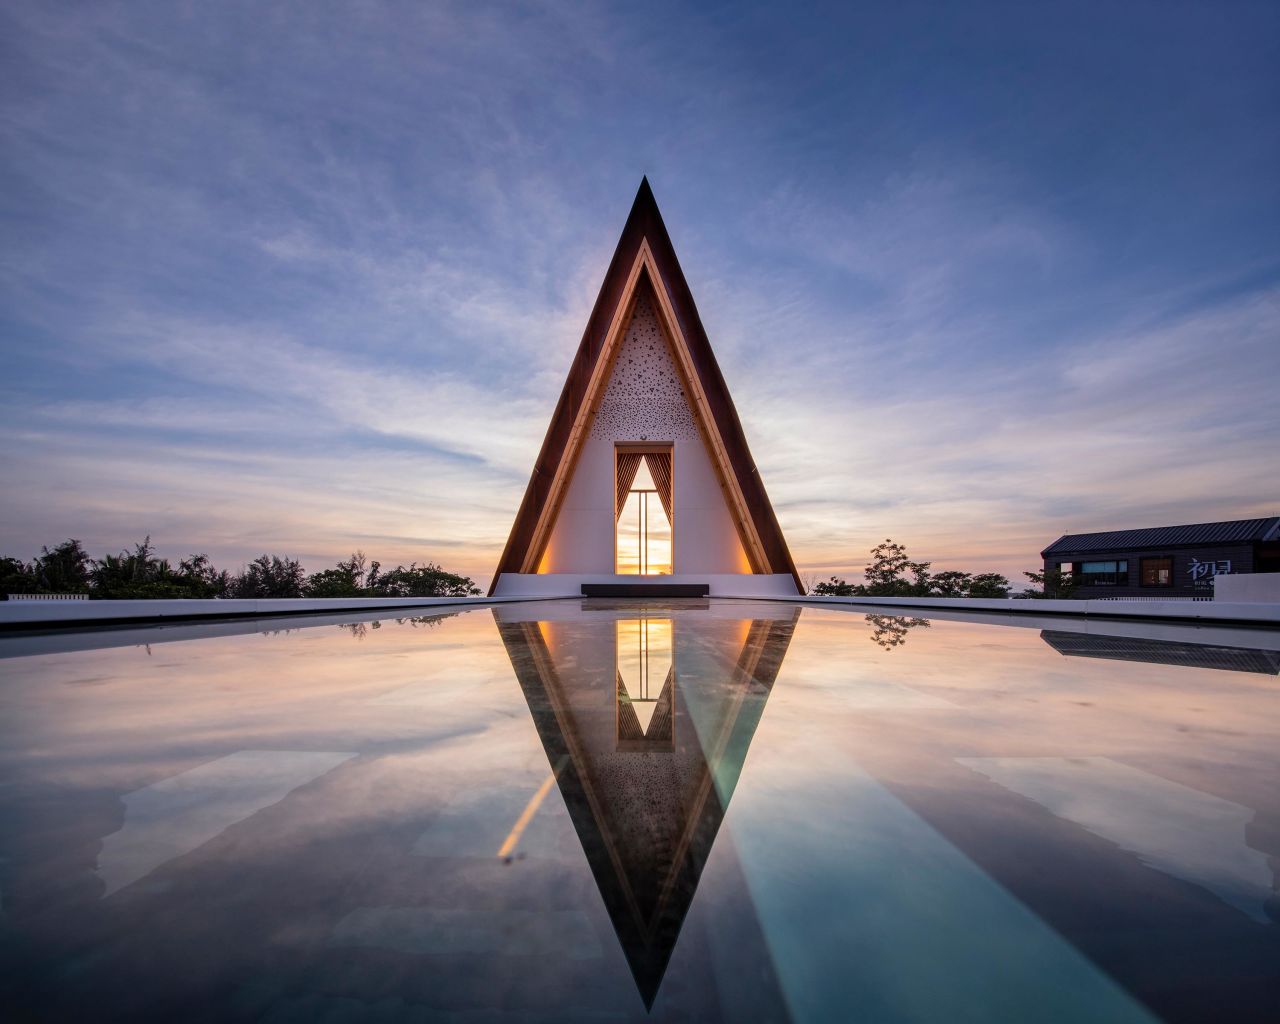 Designed by Shanghai United Design Group, this triangular structure sits in a pool of water above the Dysis Church of Poly Shallow Sea, in the Chinese seaside city of Sanya.